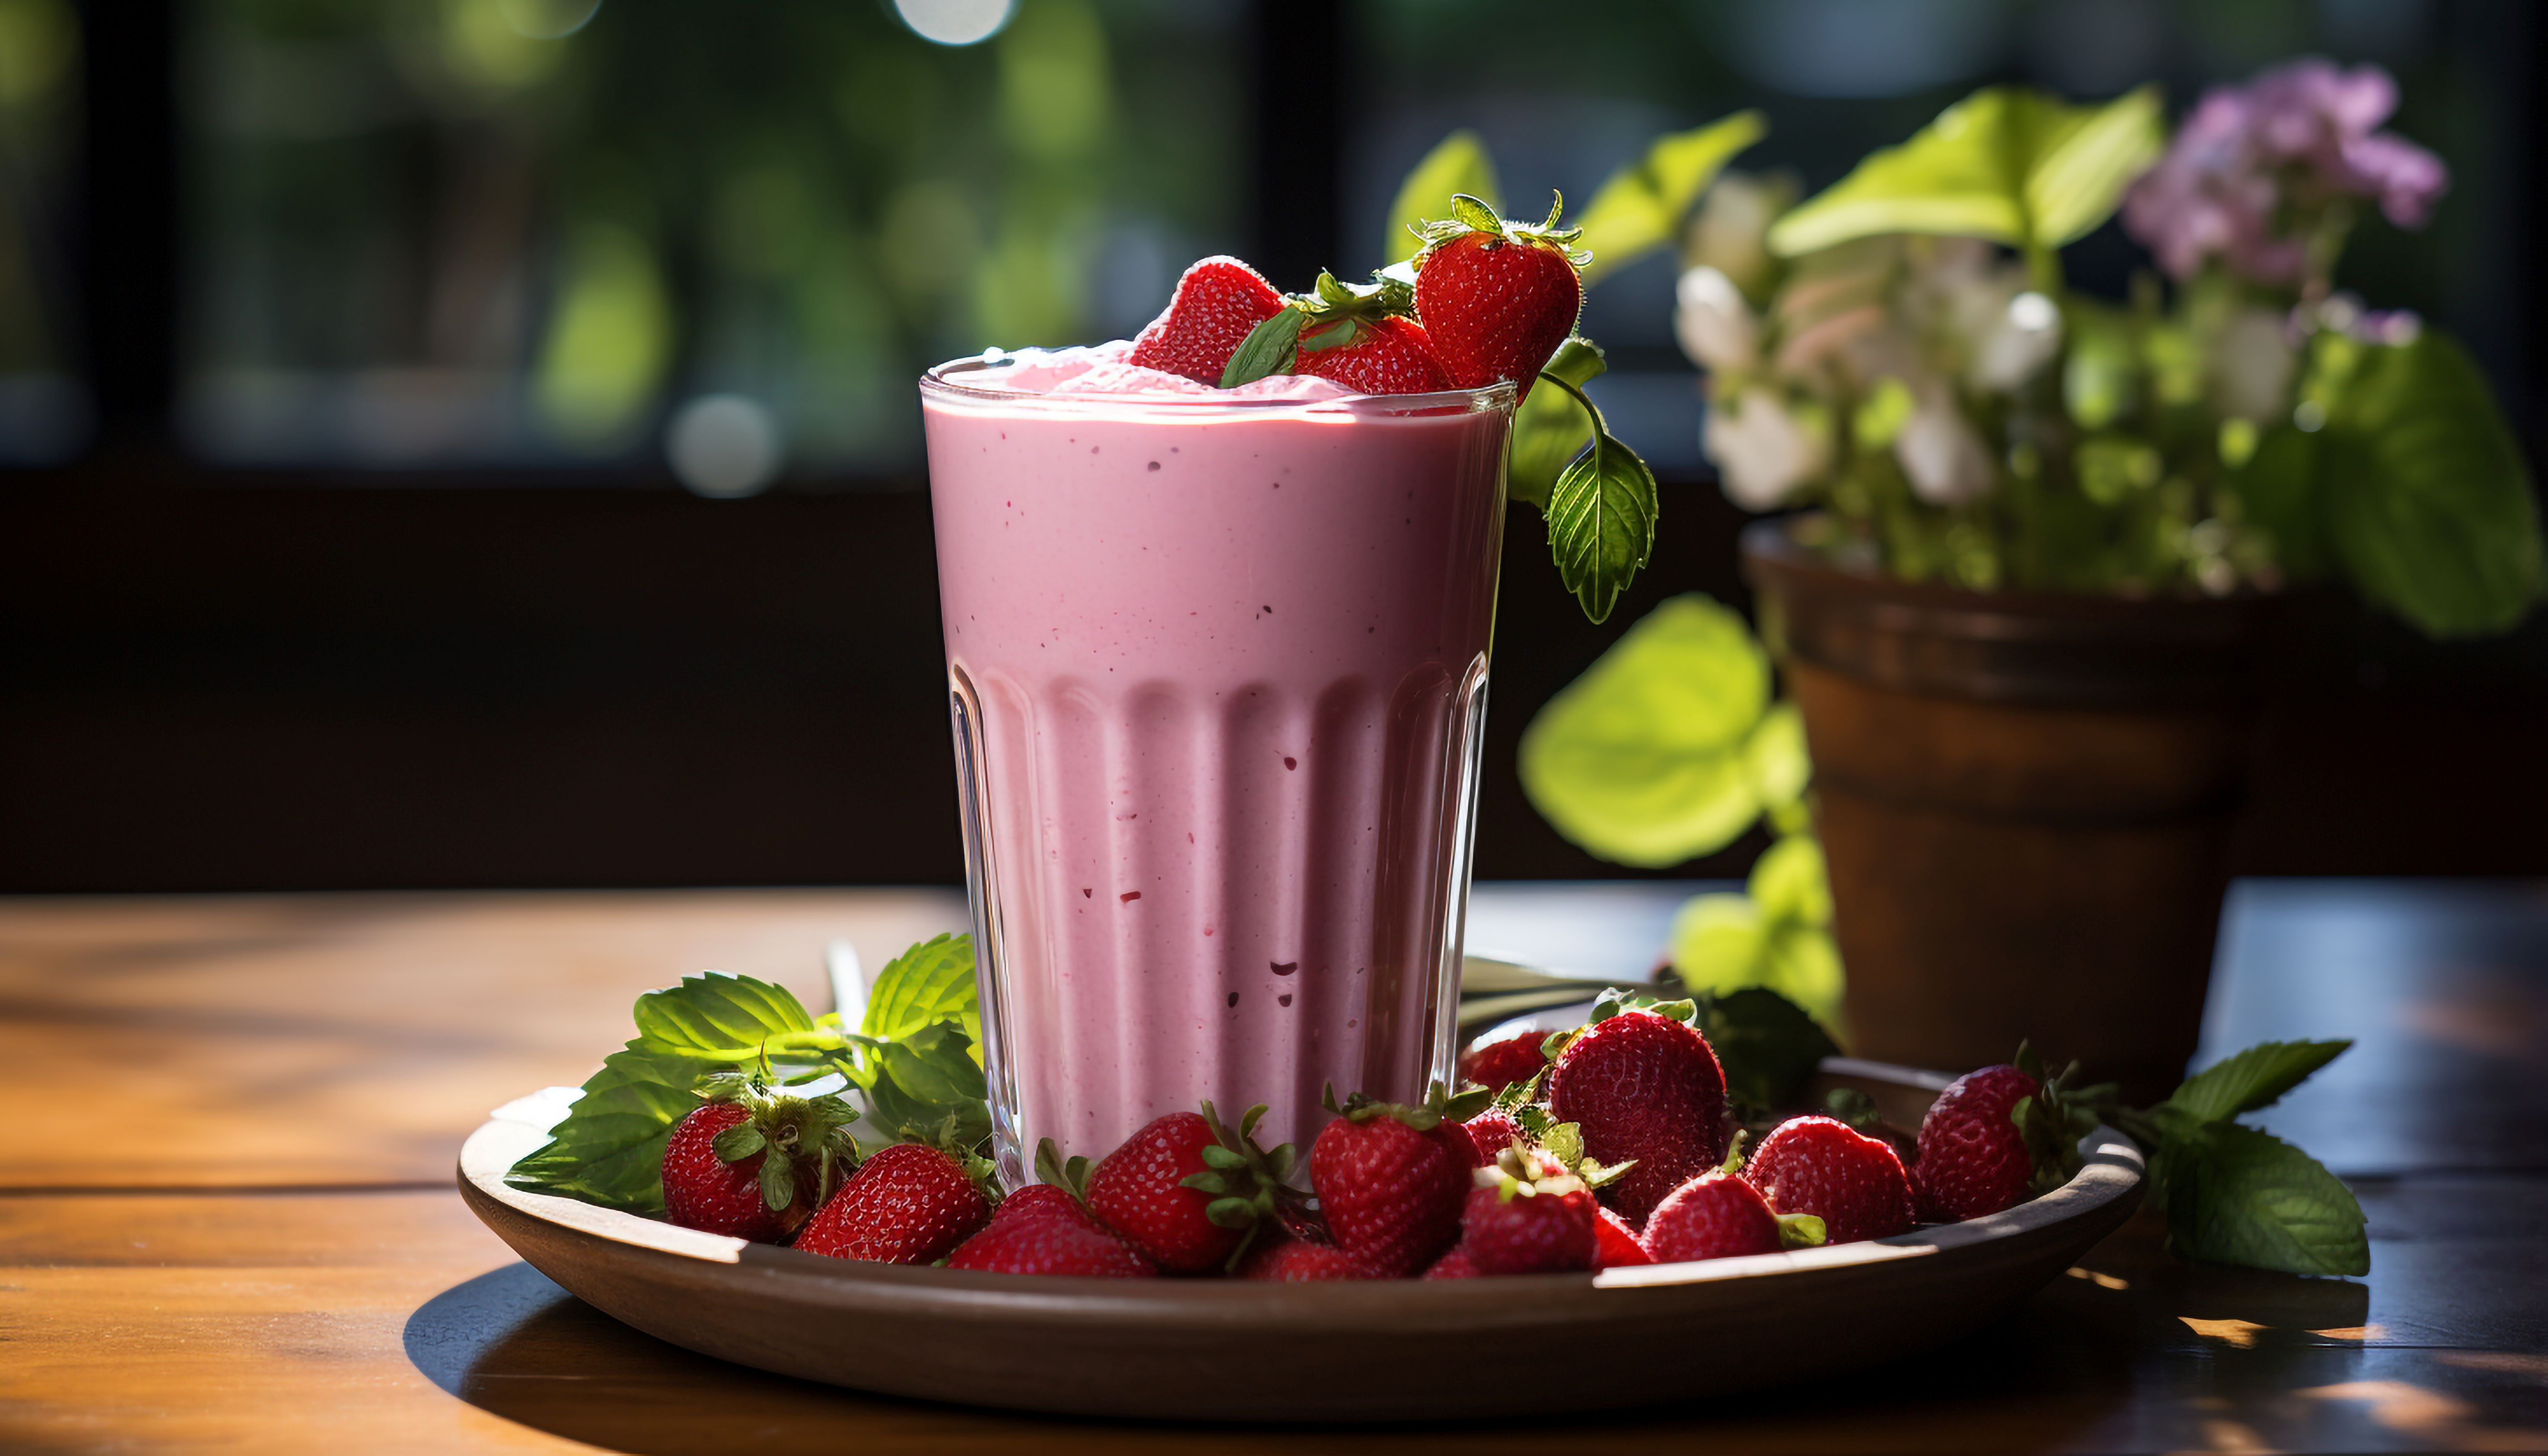 It is true! You really can make smoothies without tons of sugar and calories and with tons of nutrients. Use our strawberry smoothie recipe and taste the wholesome goodness!